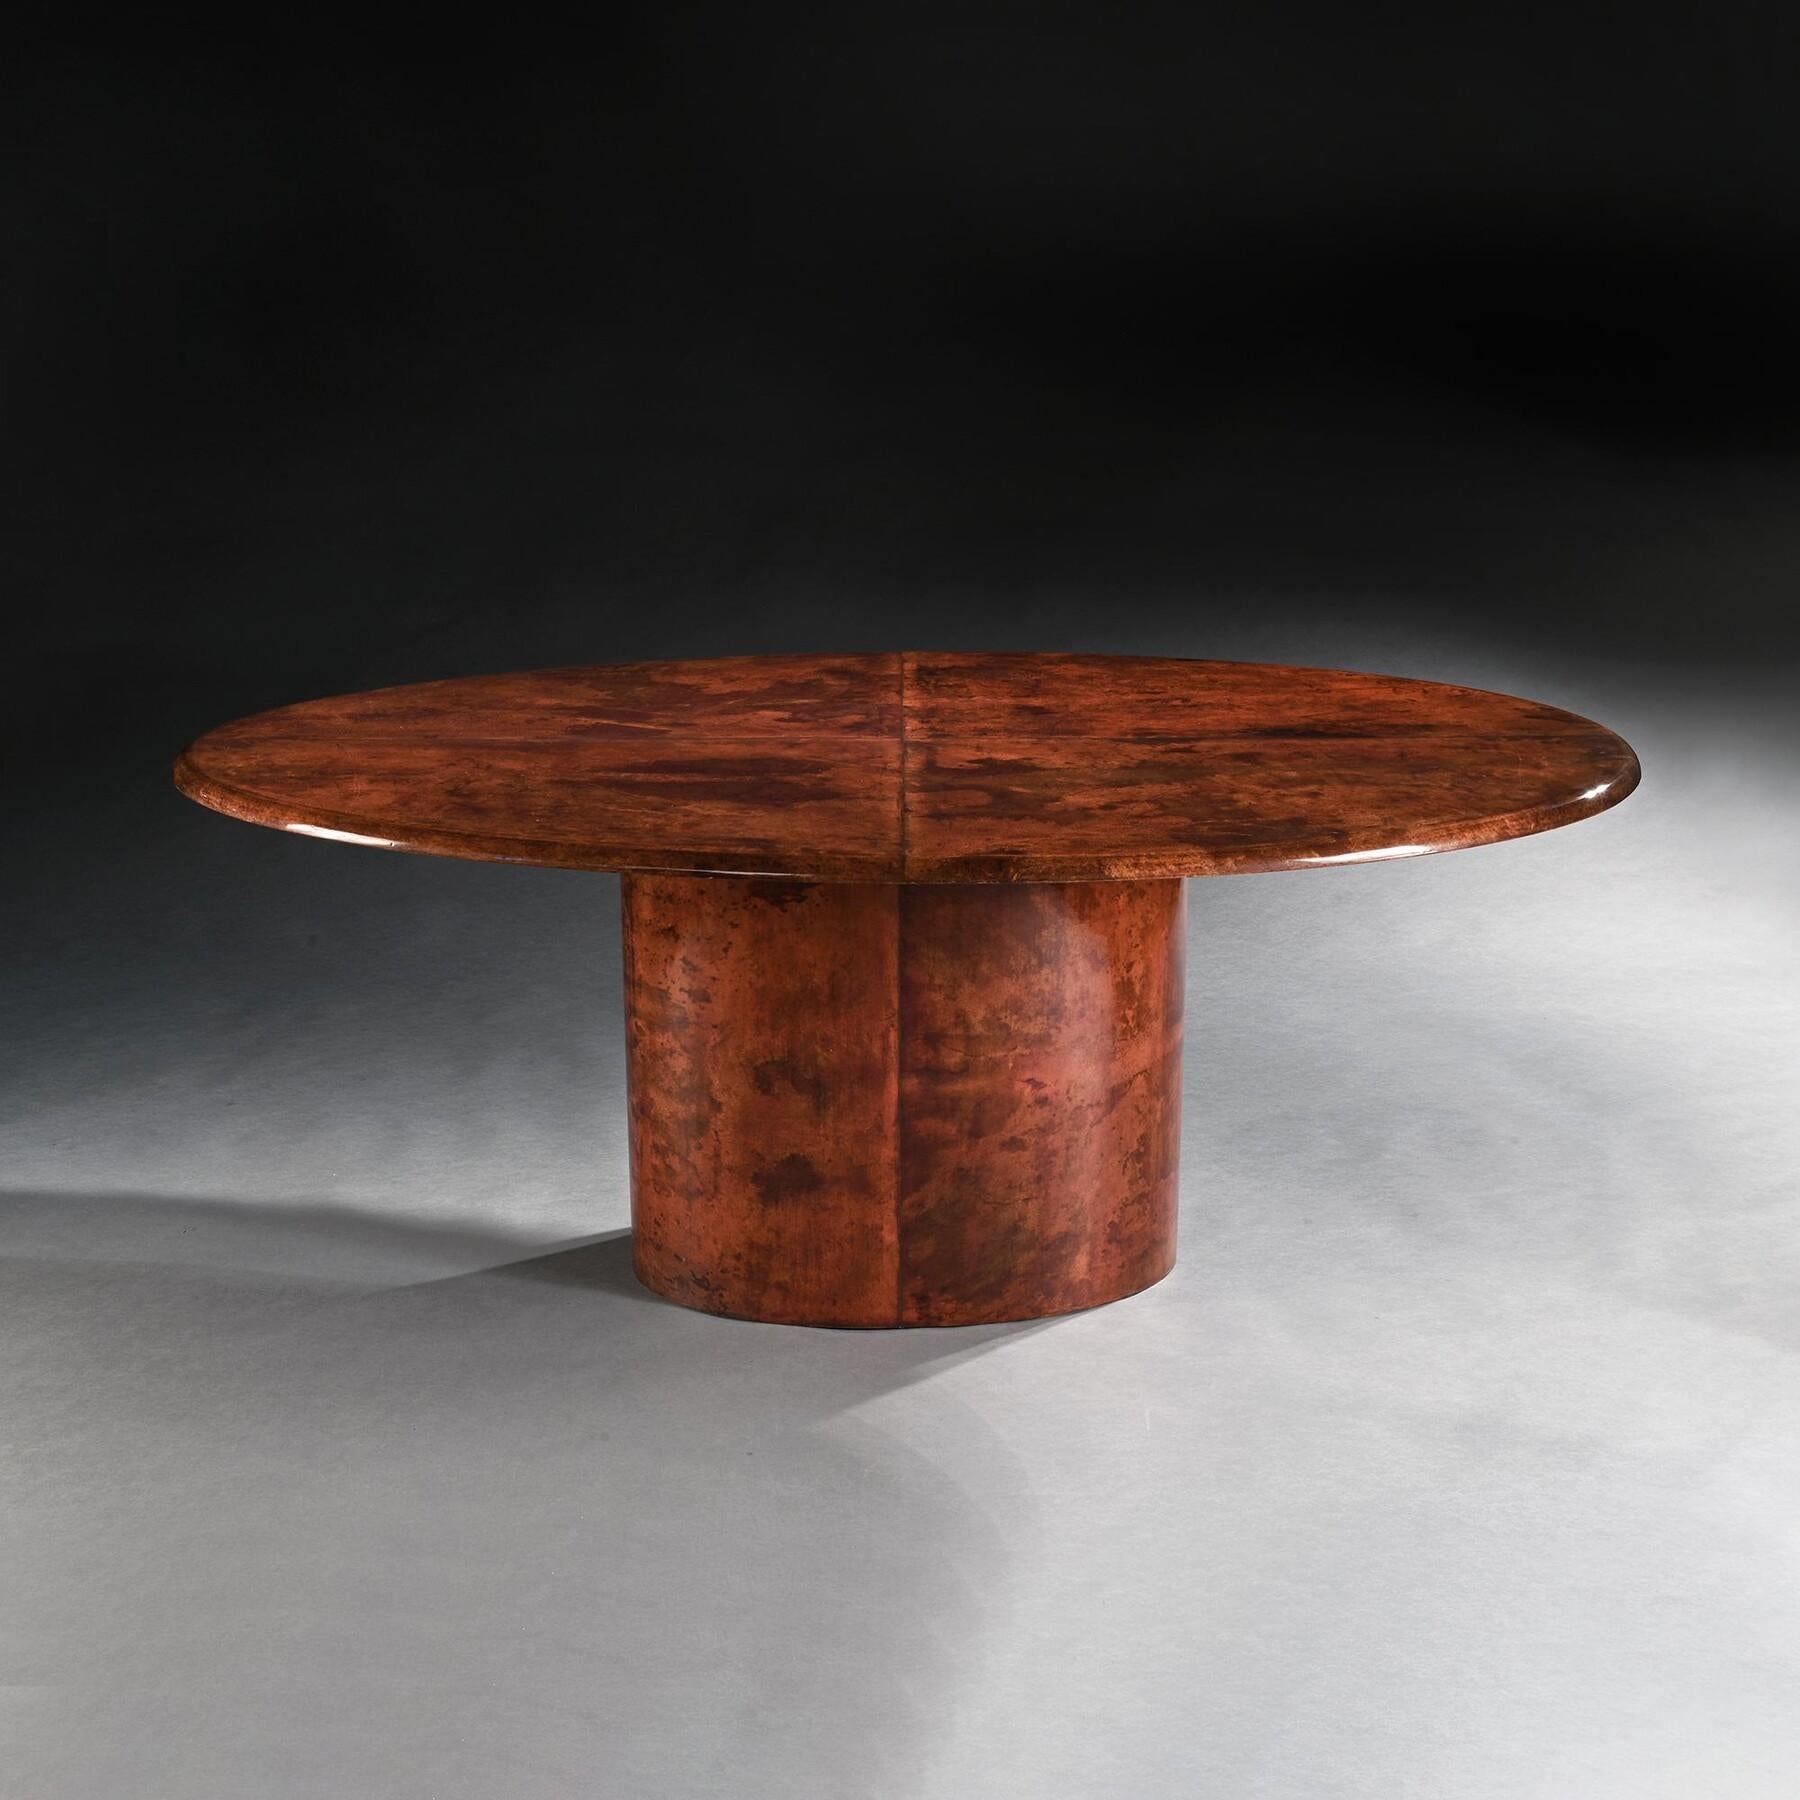 An über chic Italian Aldo Tura tobacco coloured lacquered goatskin / parchment elliptically shaped dining table by renowned Italian Desinger Aldo Tura in the mid 20th Century, a fine example.
Italy, mid 20th century - circa 1960 -70.
Of elliptical